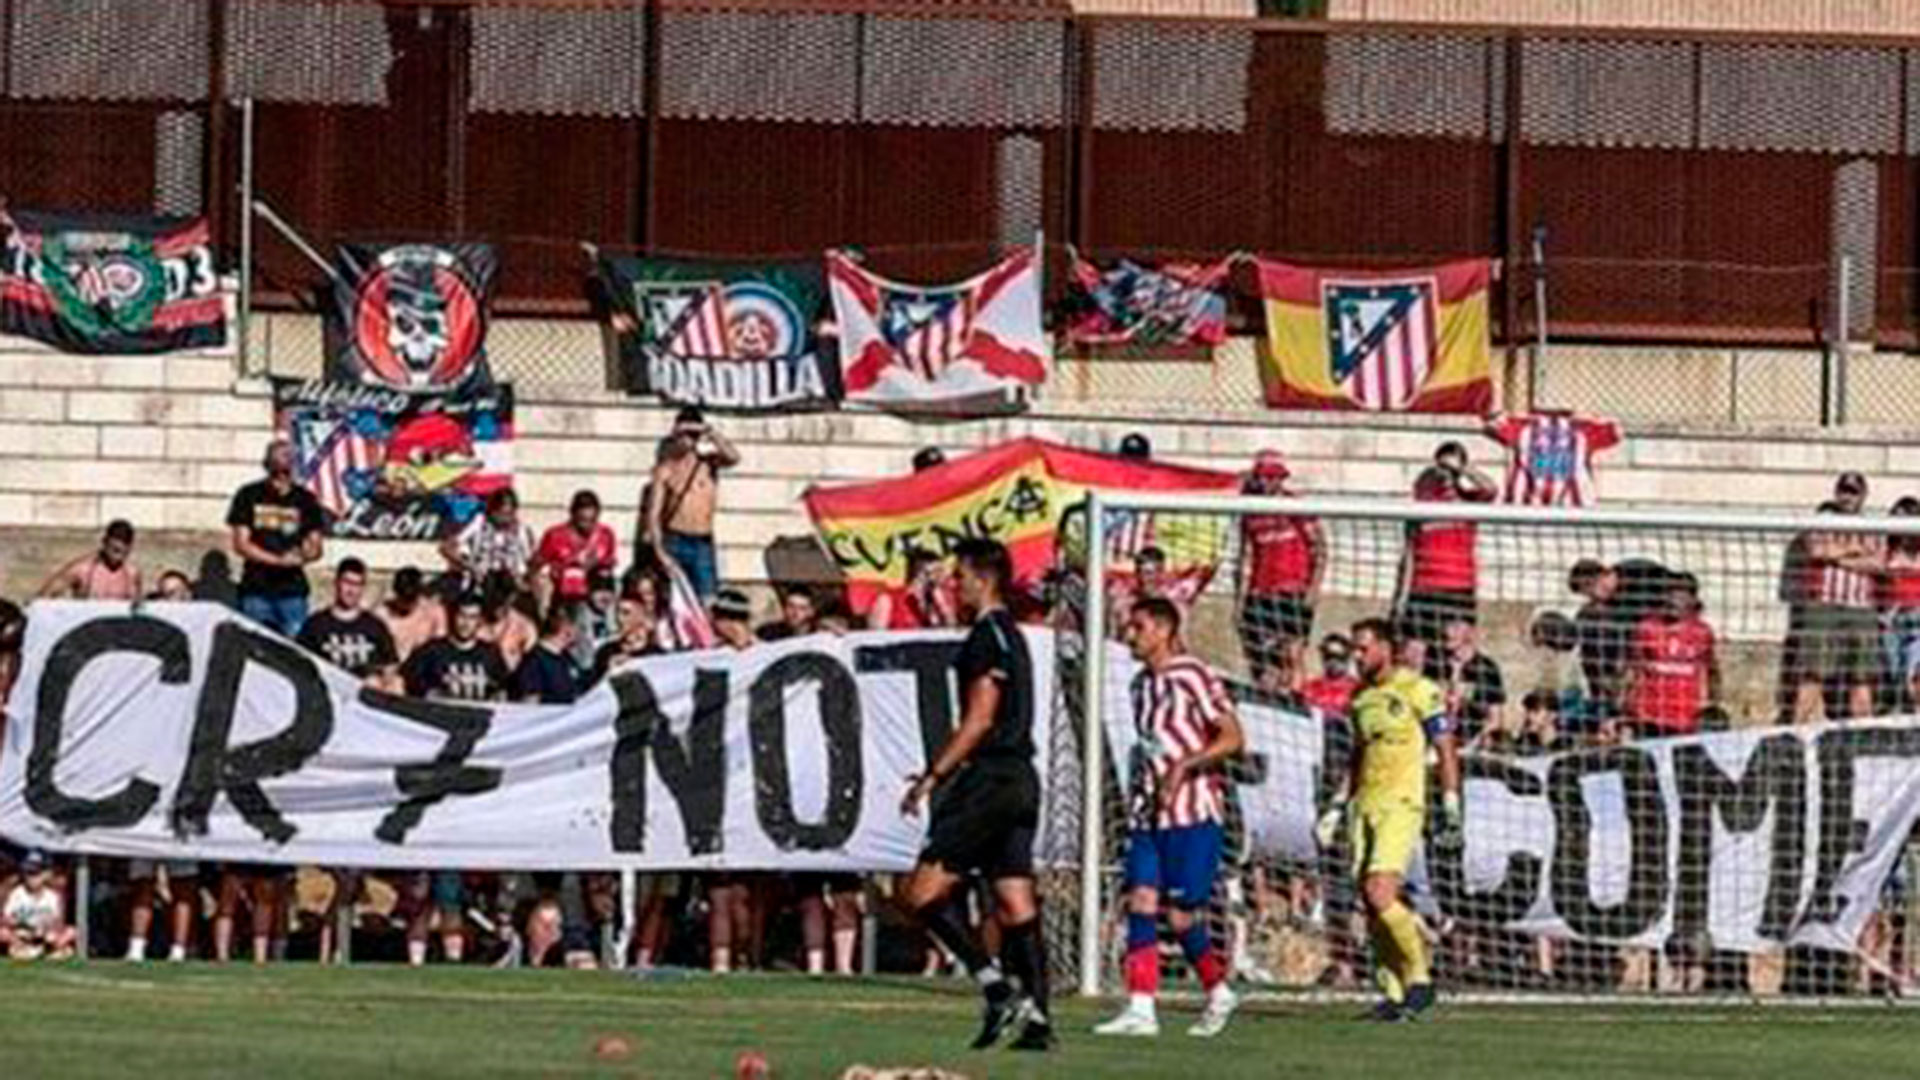 The banner of the fans of Atlético de Madrid against Cristiano Ronaldo